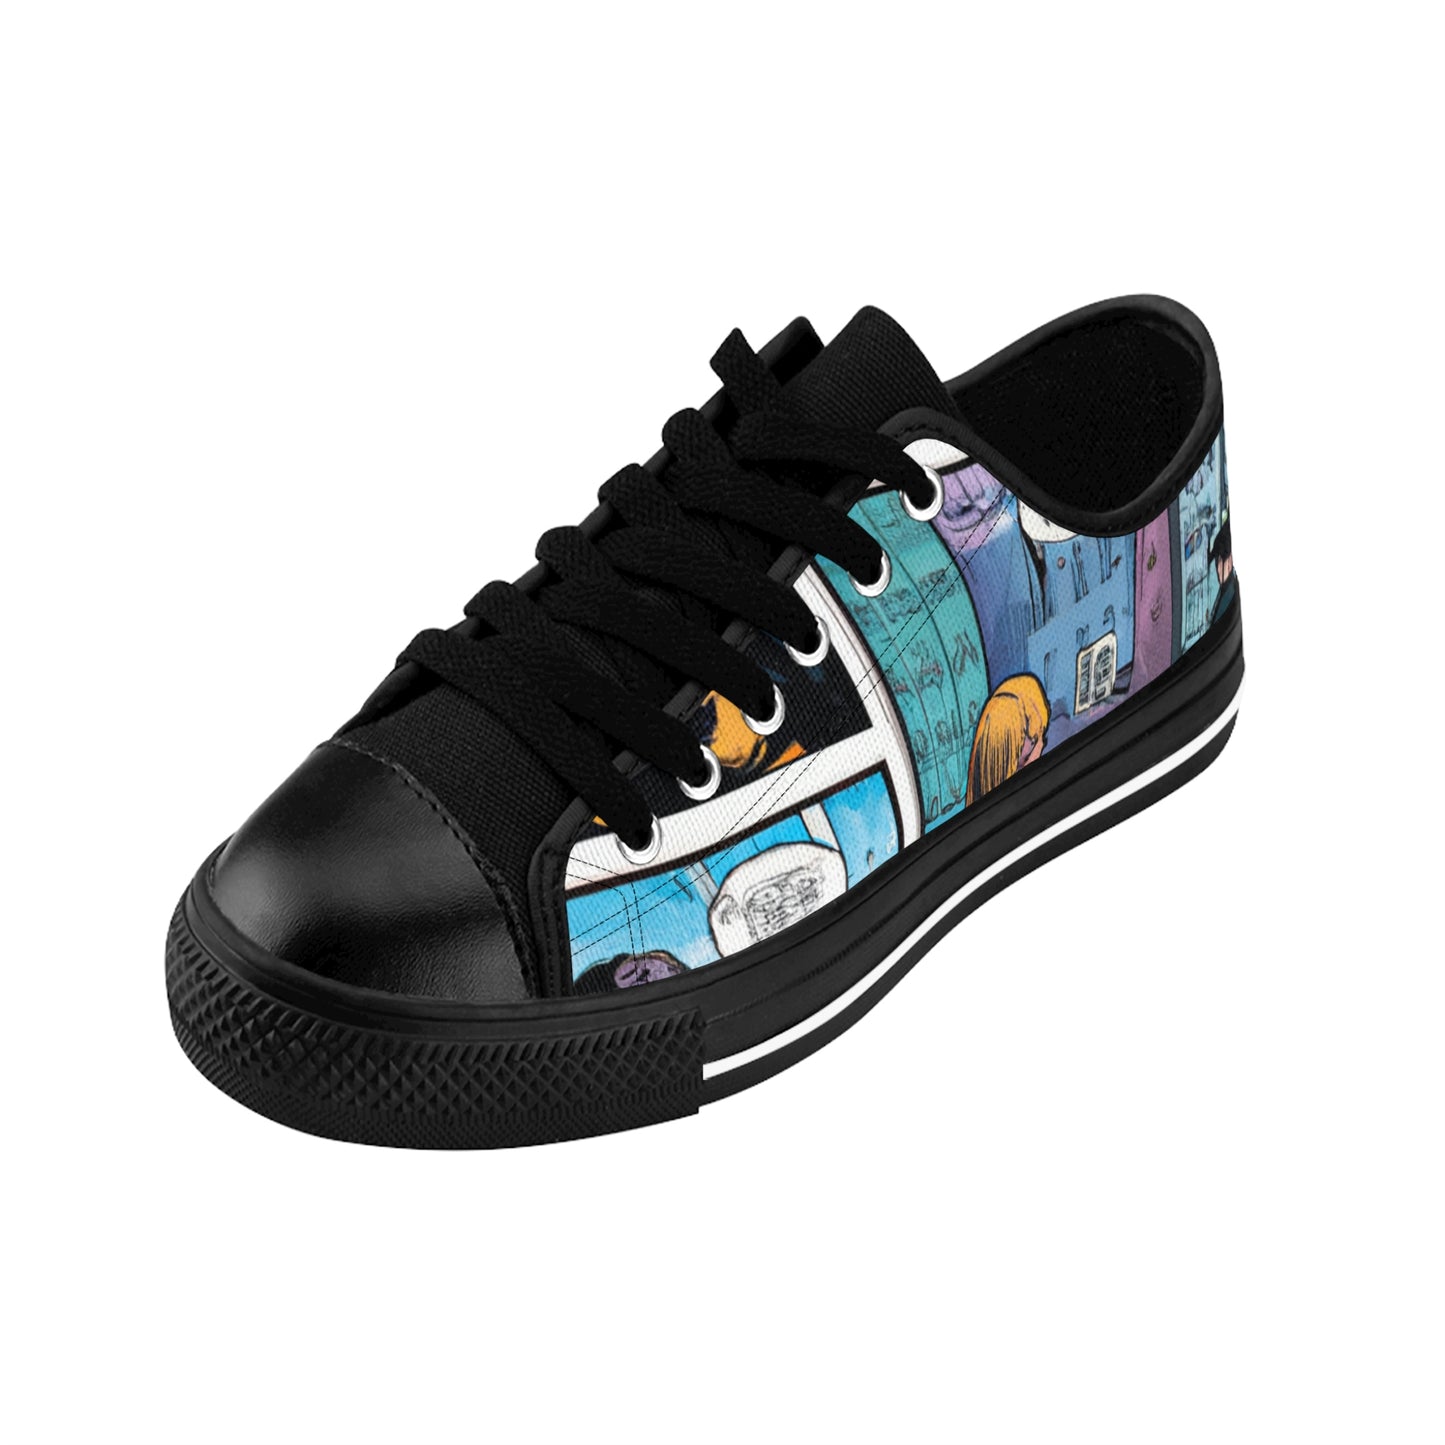 Gwendolyn le Marcheur - Comic Book Low Top